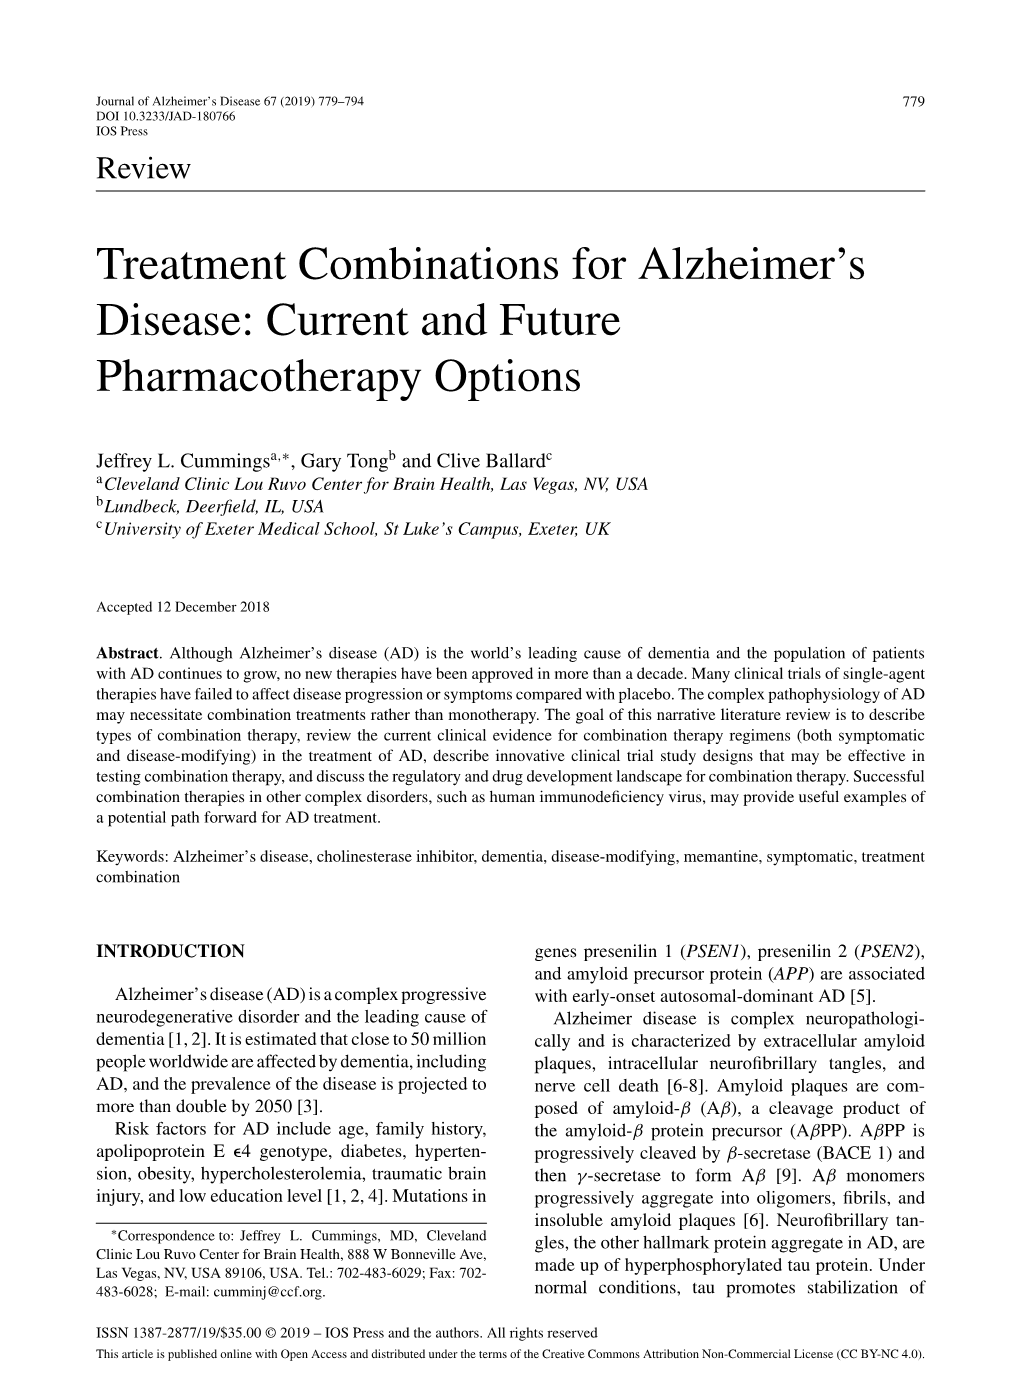 Treatment Combinations for Alzheimer's Disease